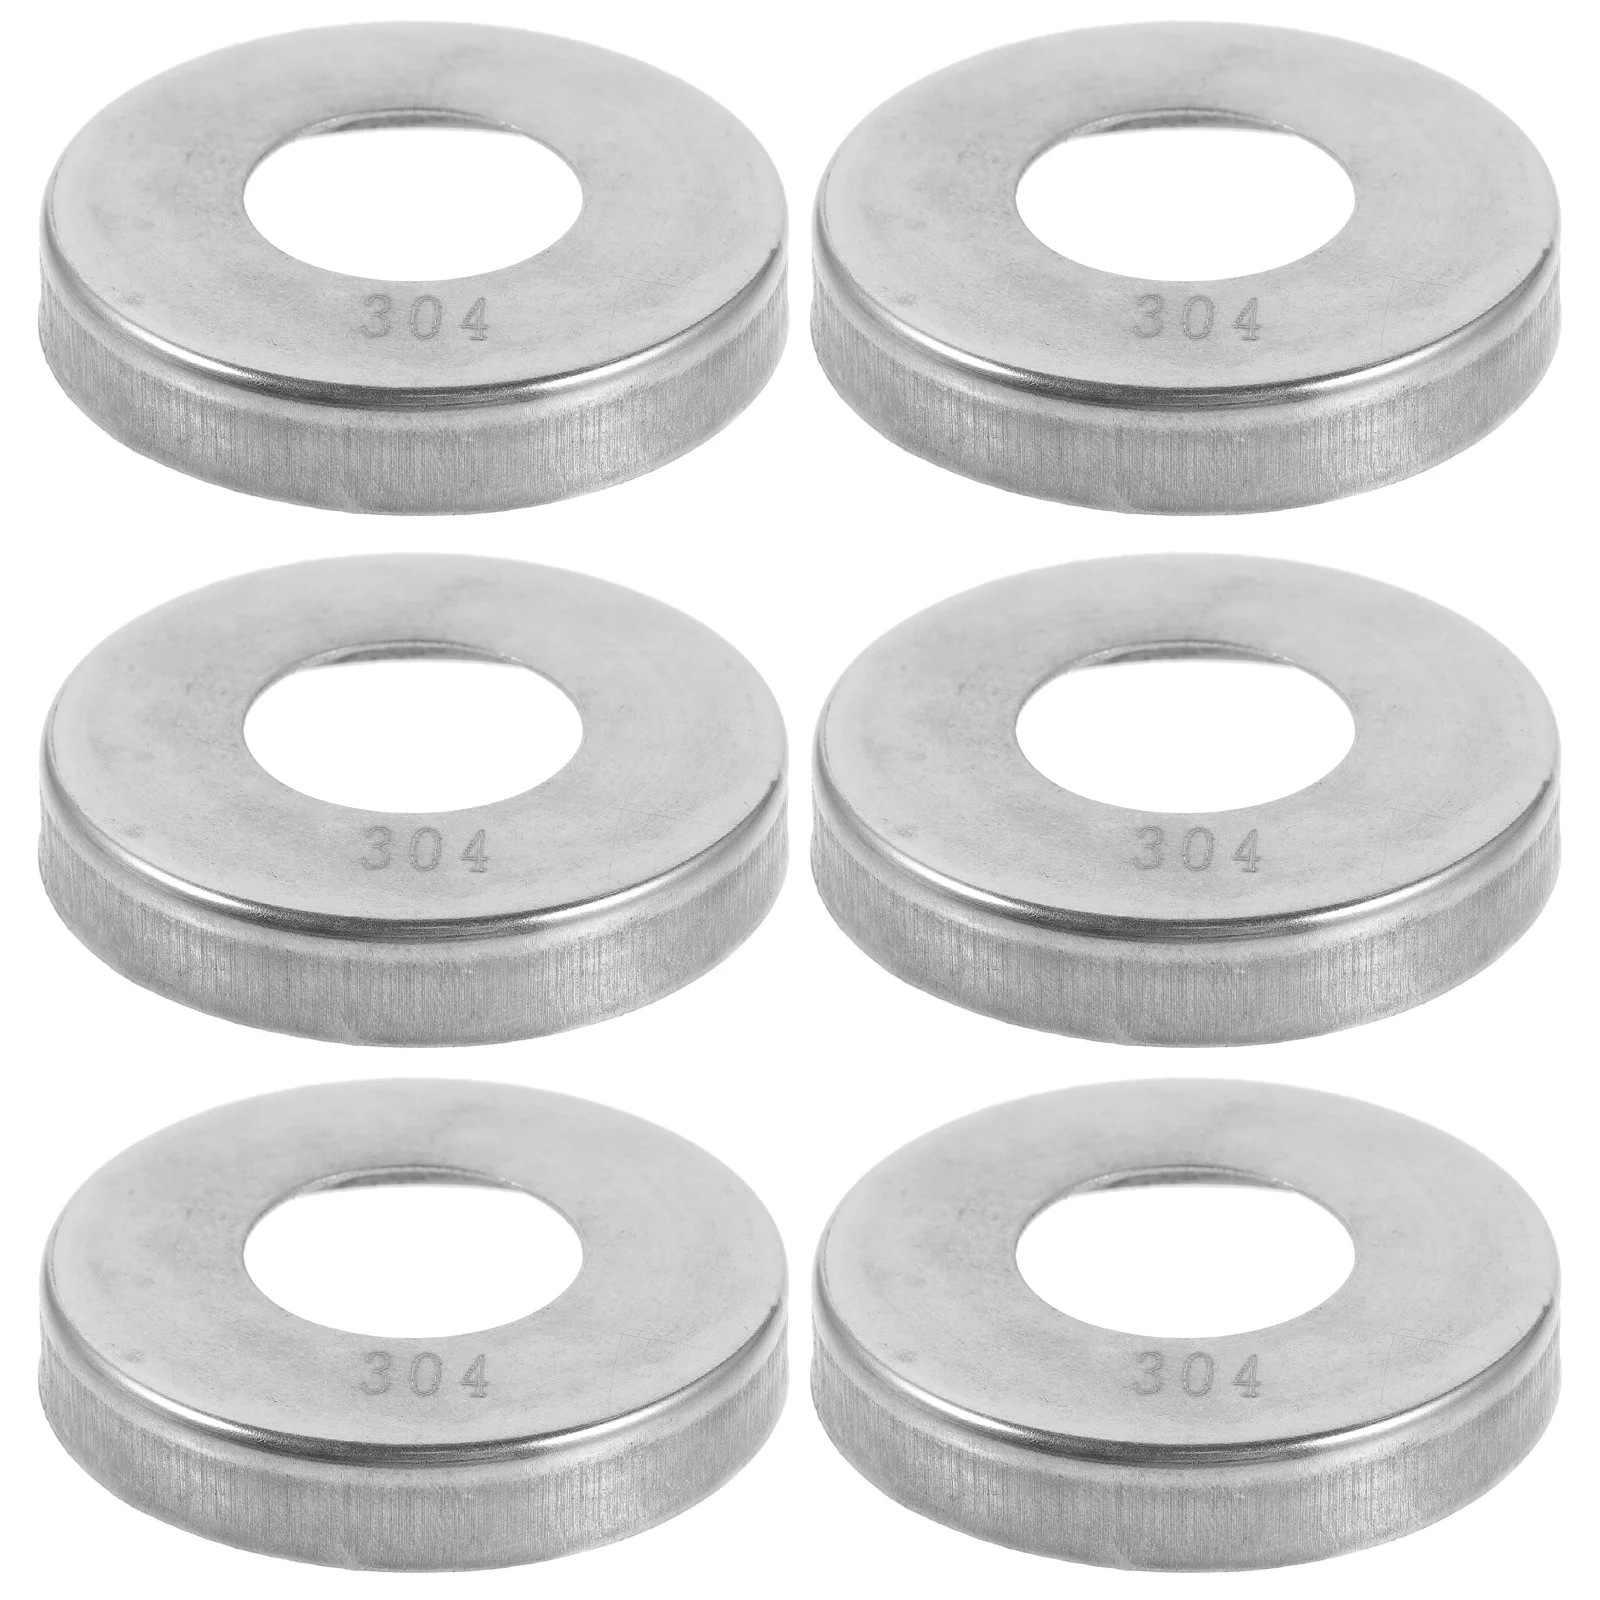 

6 Pcs Pipe Post Flange Base Sewer Railing Cover Covers Bathroom 304 Stainless Steel Deck